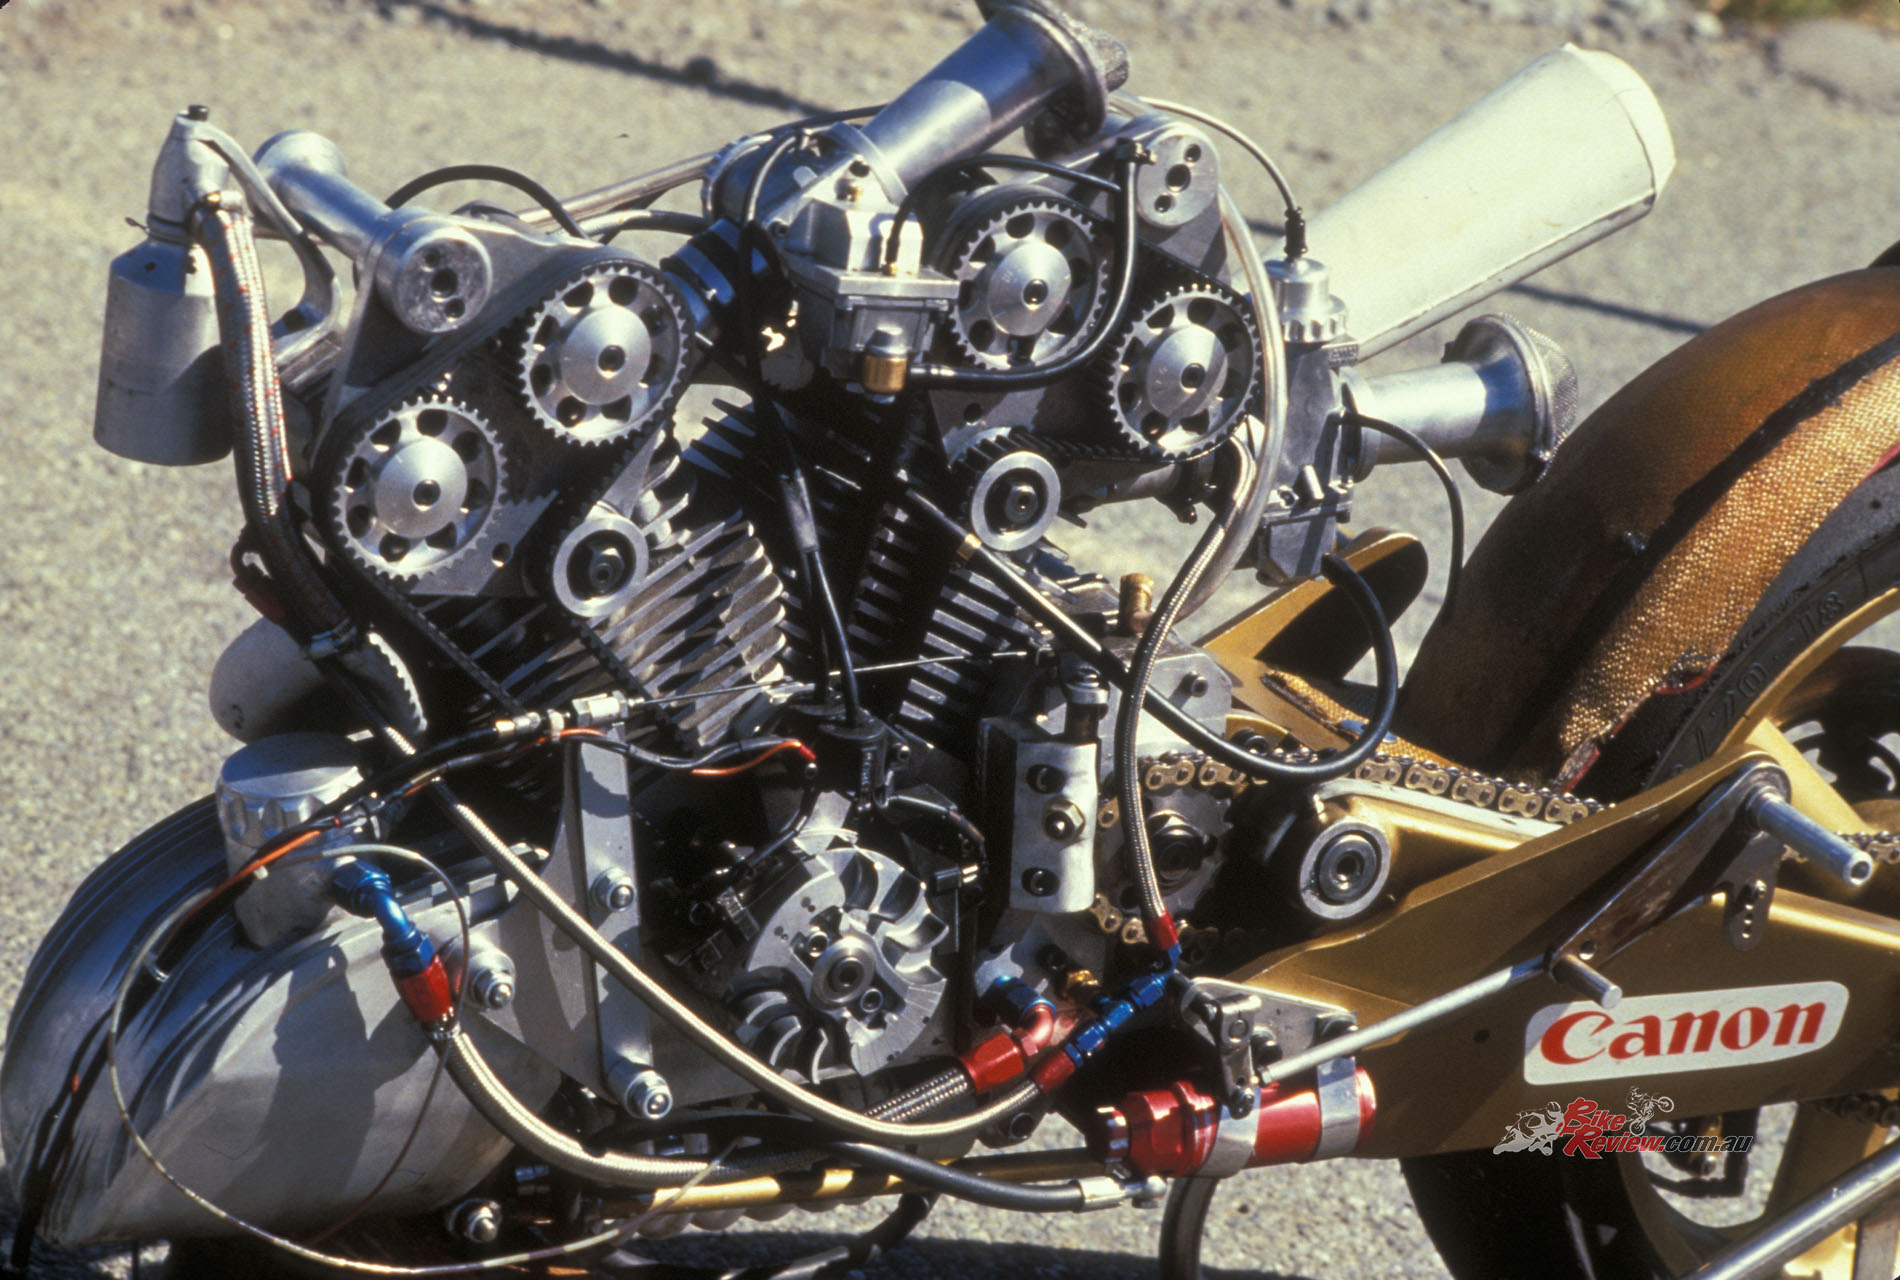 The fast but fragile Denco engine's unreliability forced John to design and build his own engine, the first liquid-cooled 60° V-twin DOHC eight-valve Britten, which debuted at Daytona in 1989.